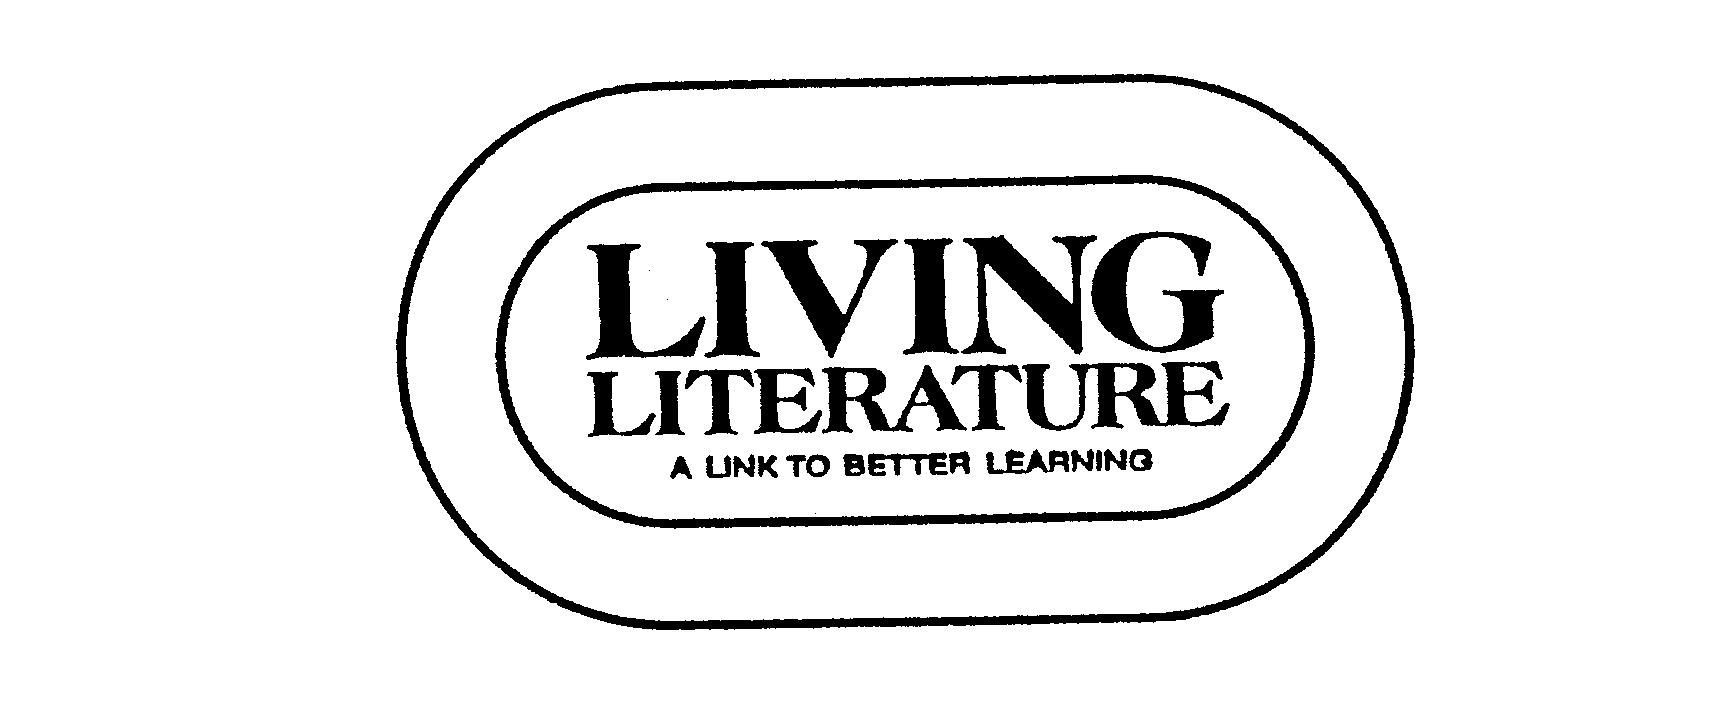  LIVING LITERATURE A LINK TO BETTER LEARNING